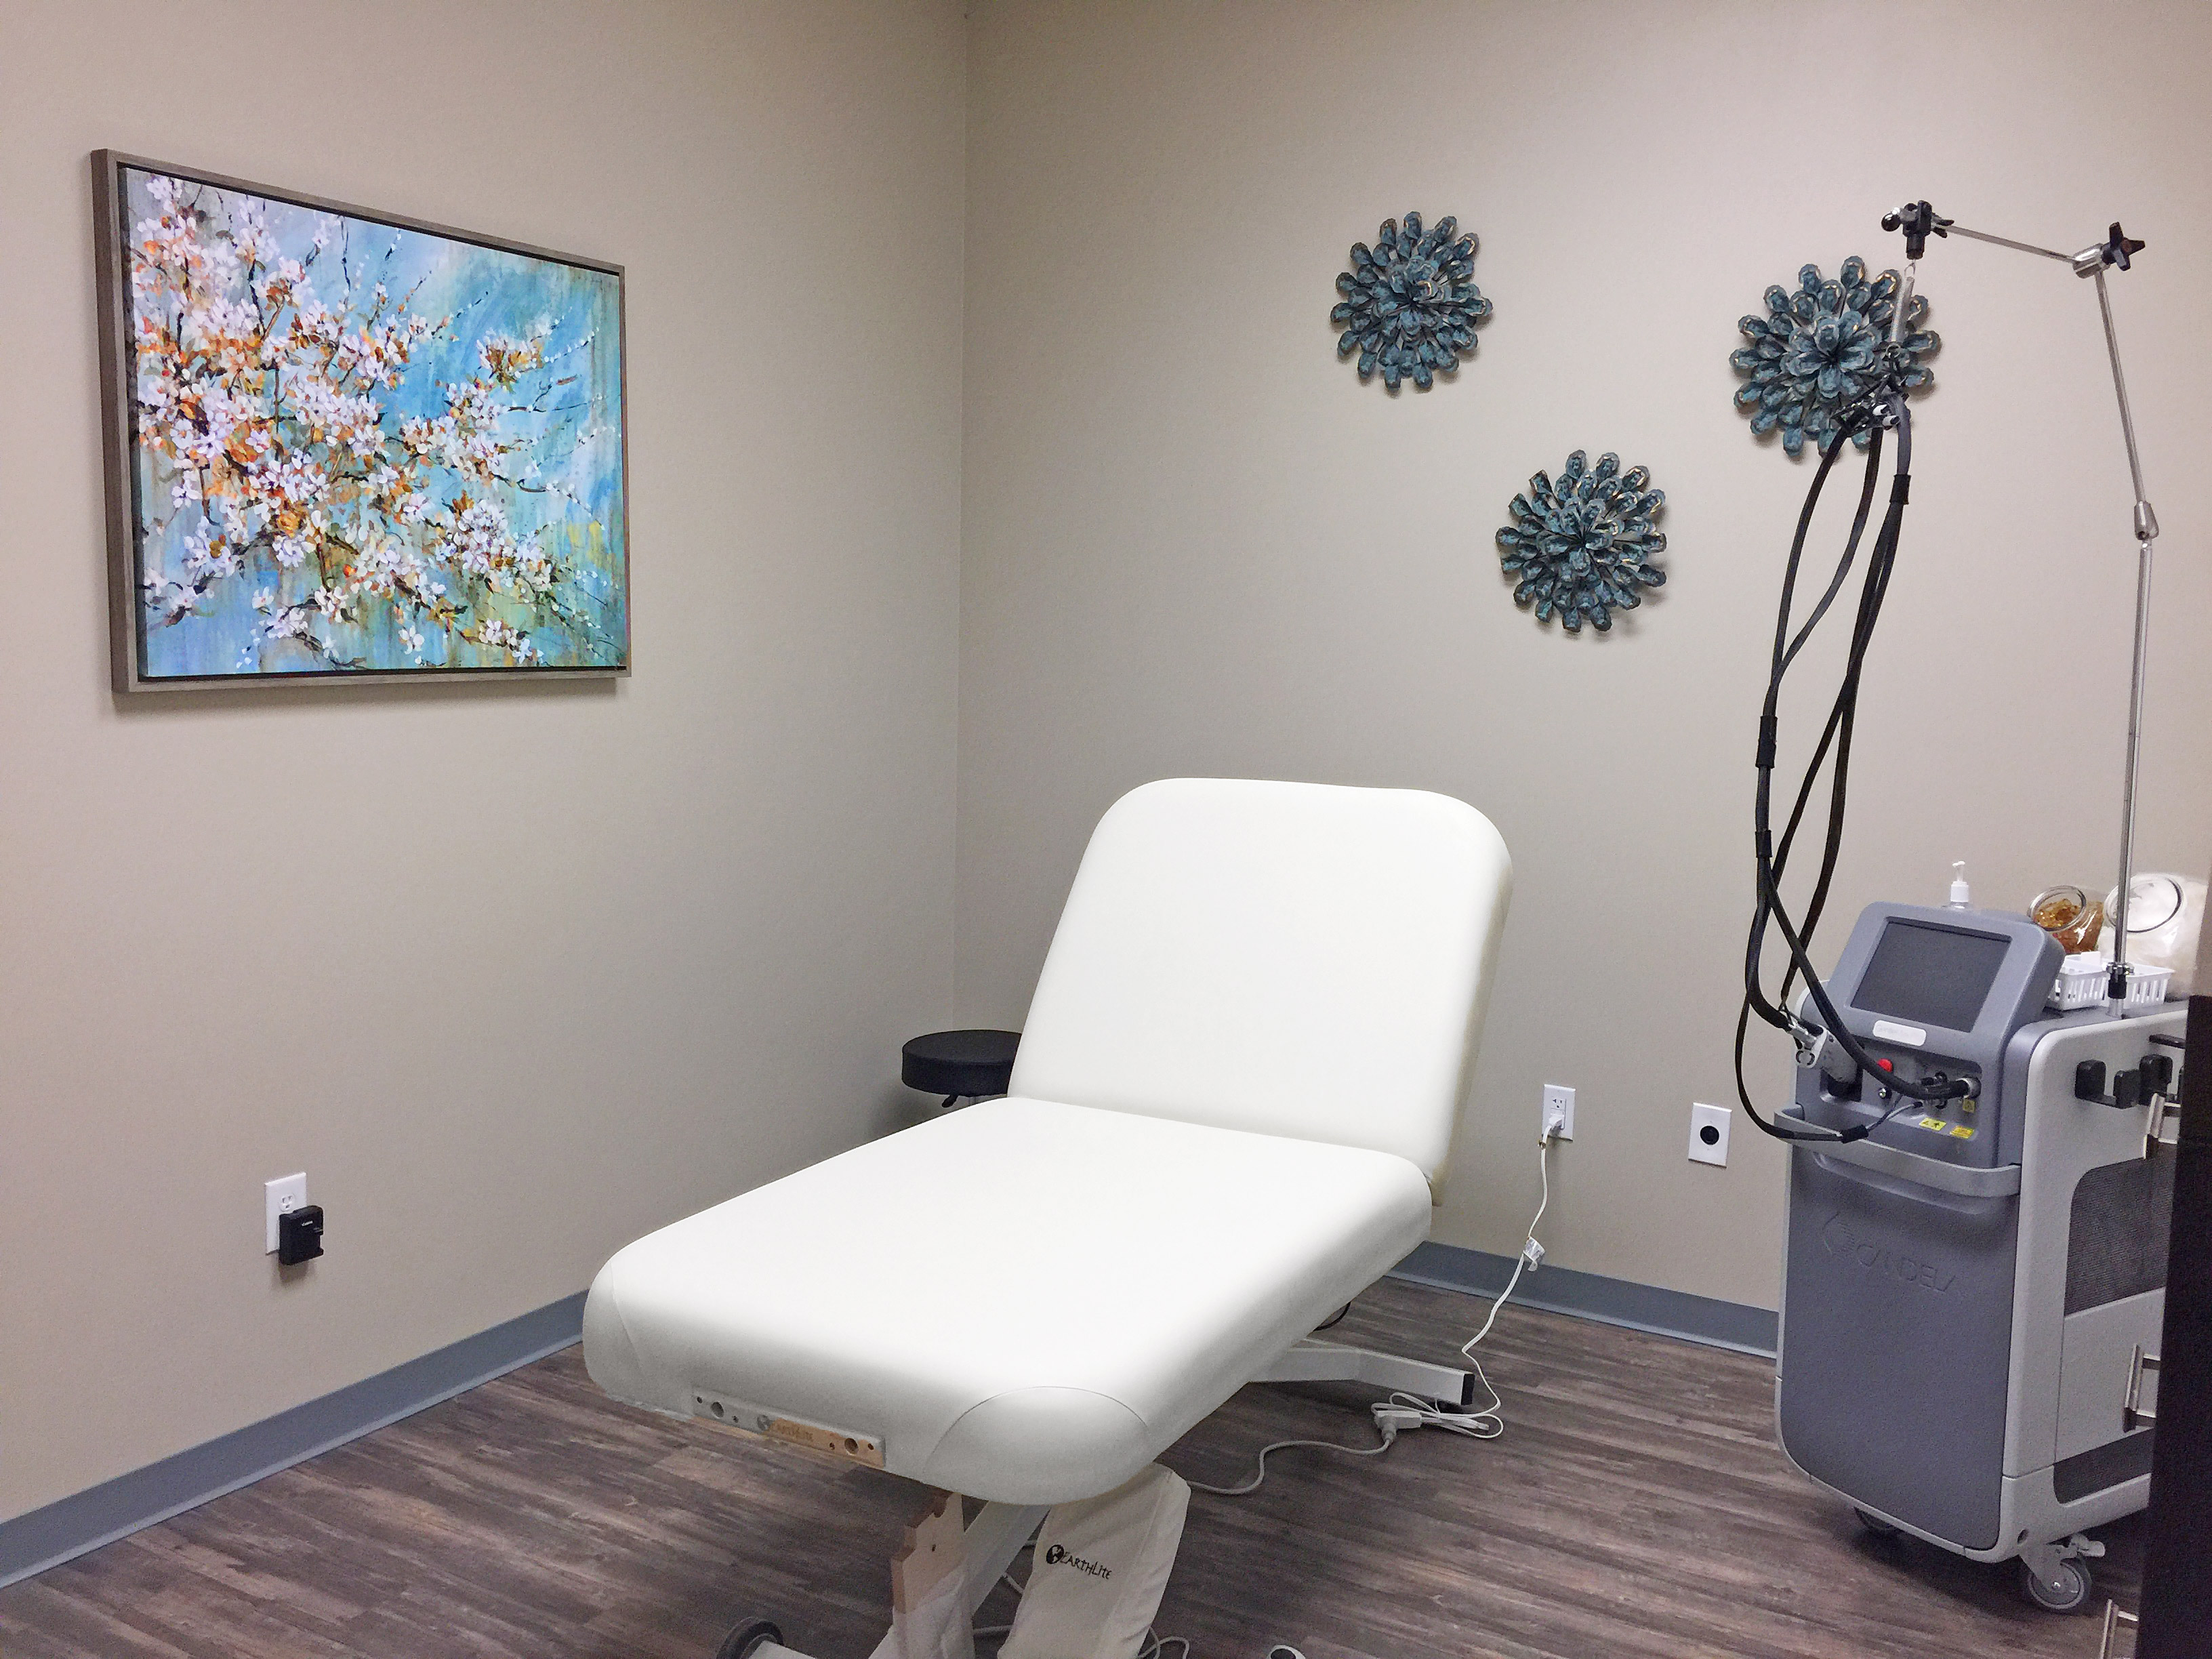 Milan Laser Hair Removal Denver South - Laser Hair Removal Near Me: The Largest Directory of ...